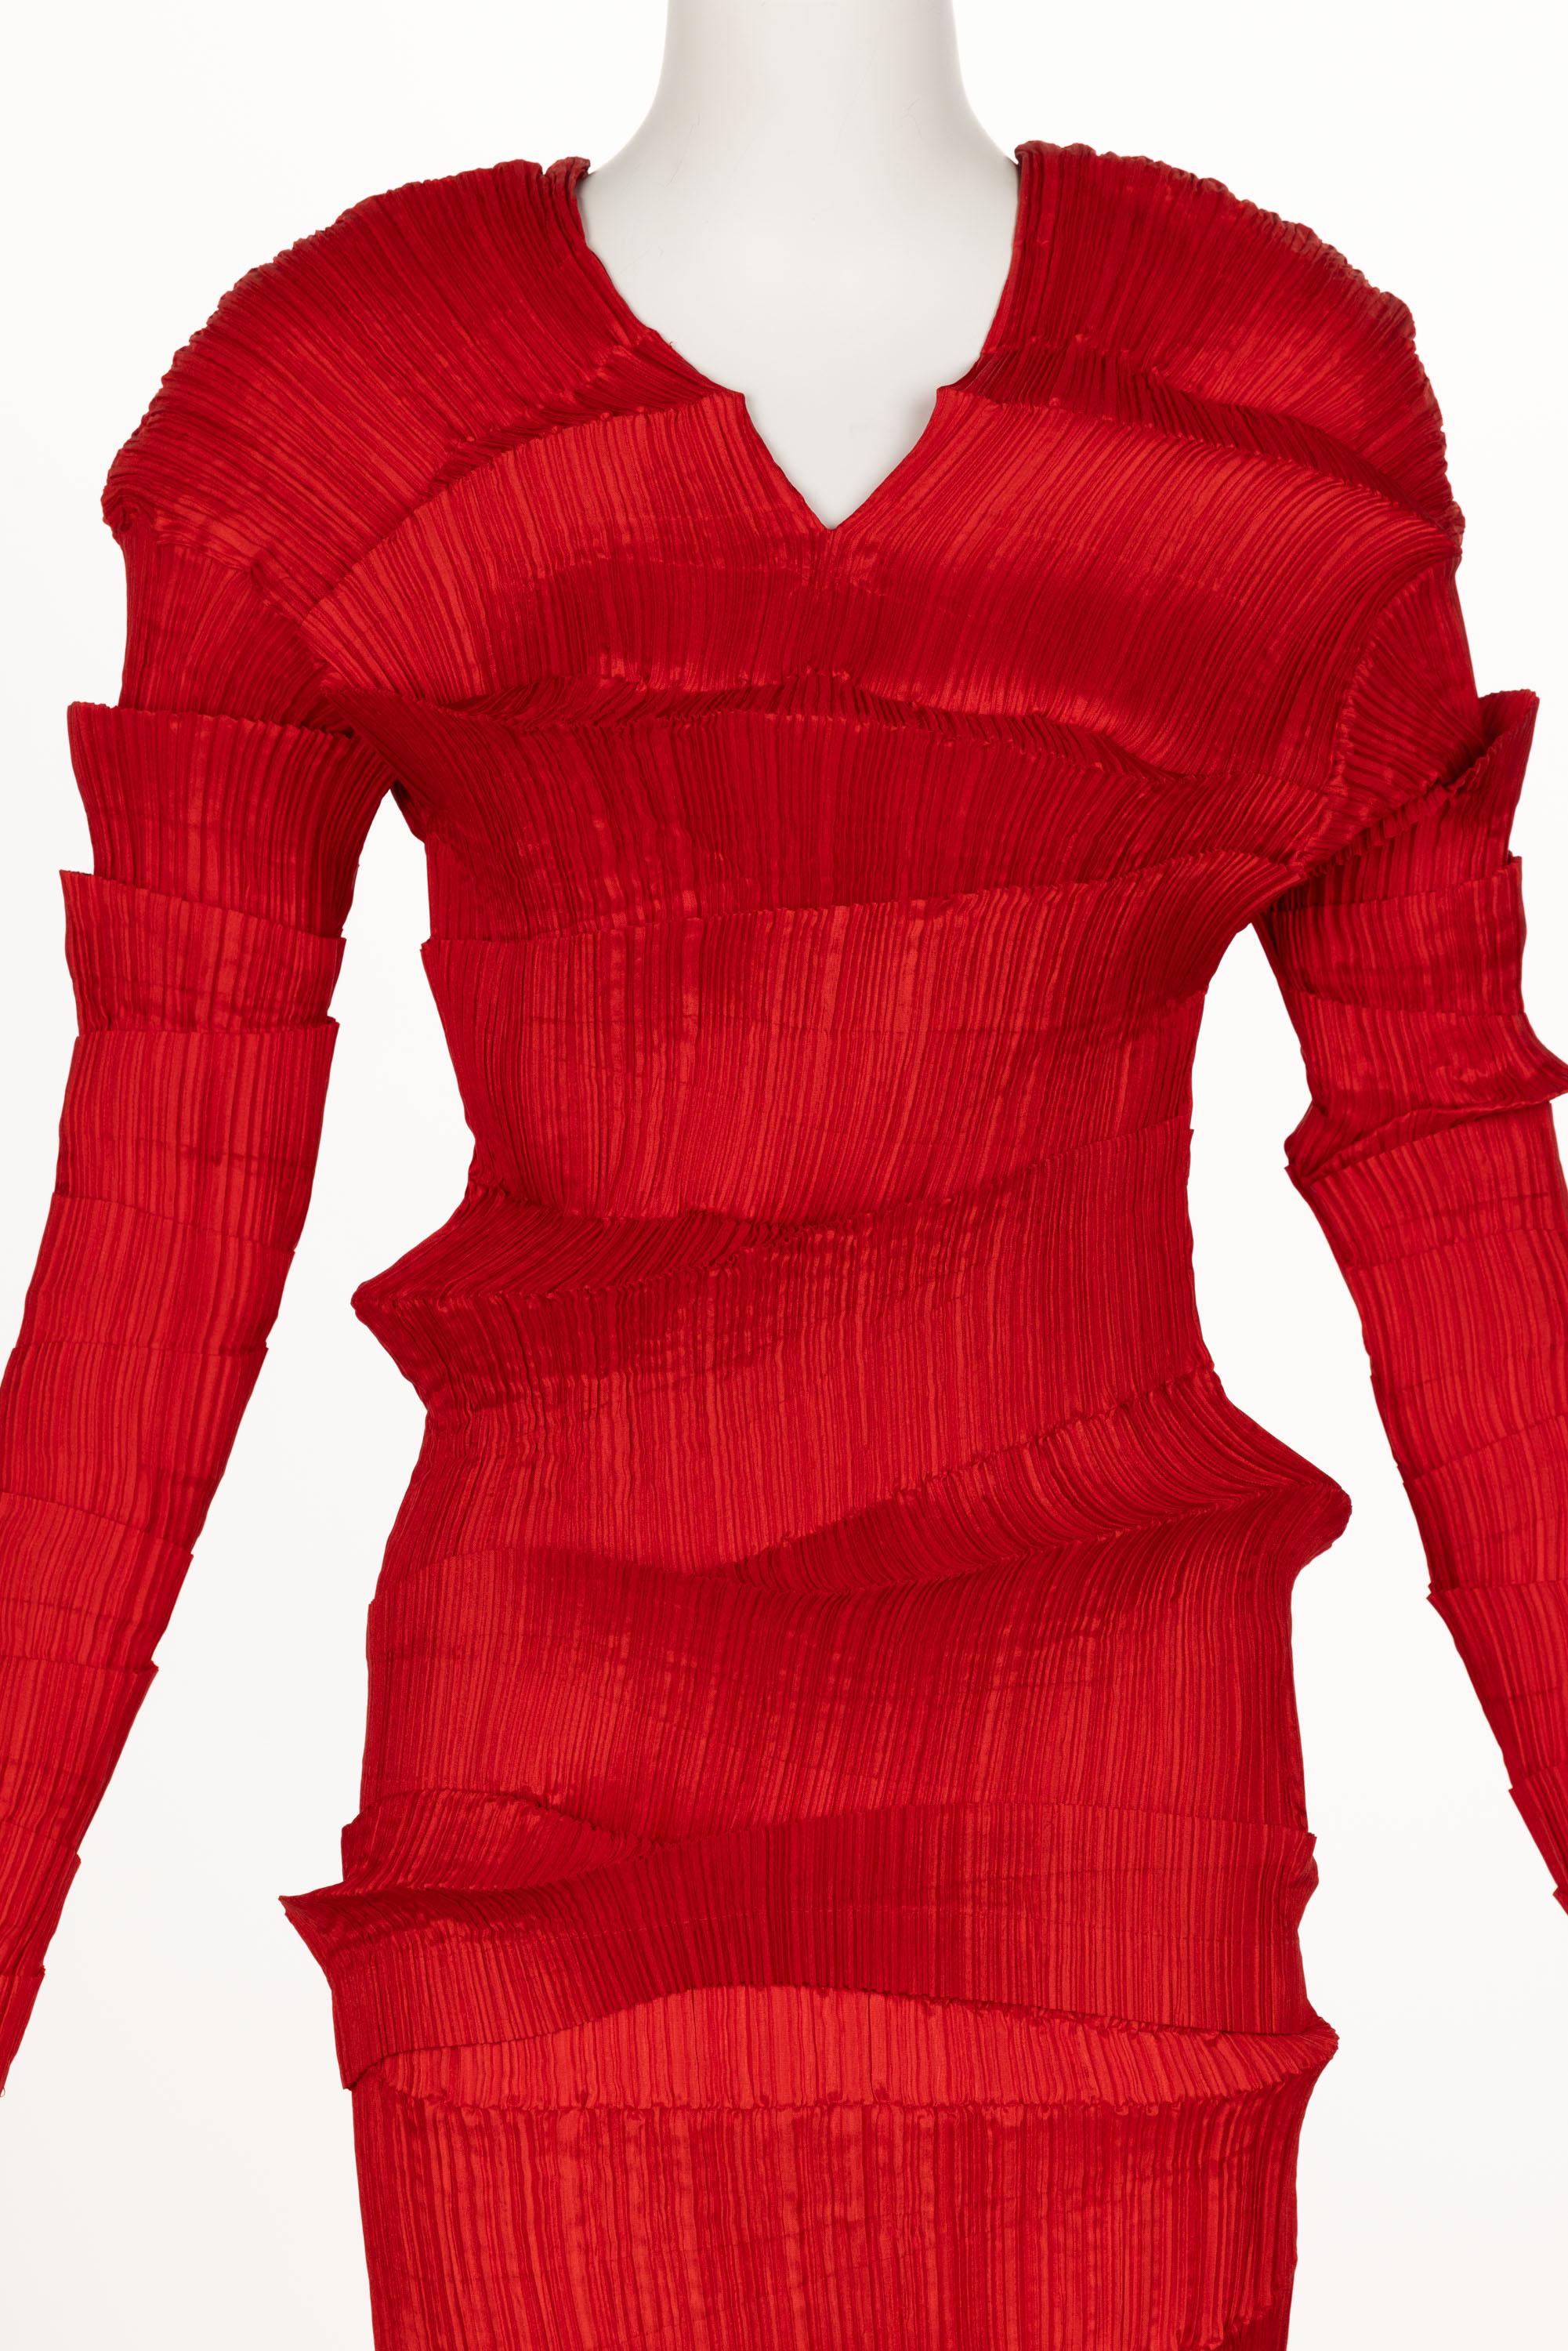 Incredible 1990s Issey Miyake Pleated Red Top & Skirt Ensemble For Sale 11